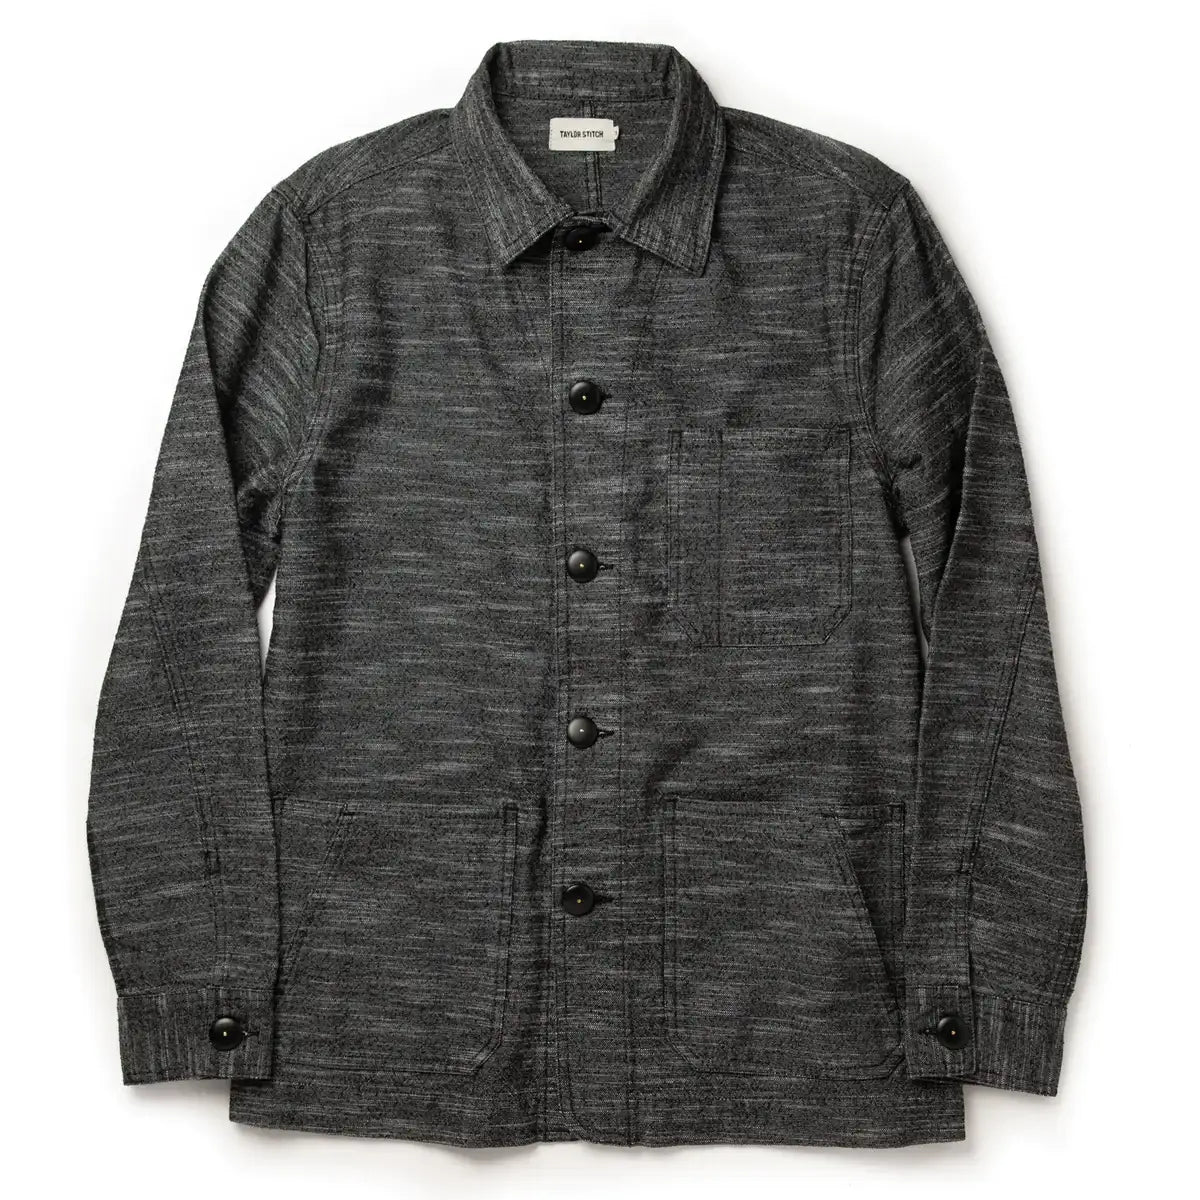 Taylor Stitch - TAYLOR STITCH THE OJAI JACKET IN BLACK CROSS DYE - Rent With Thred